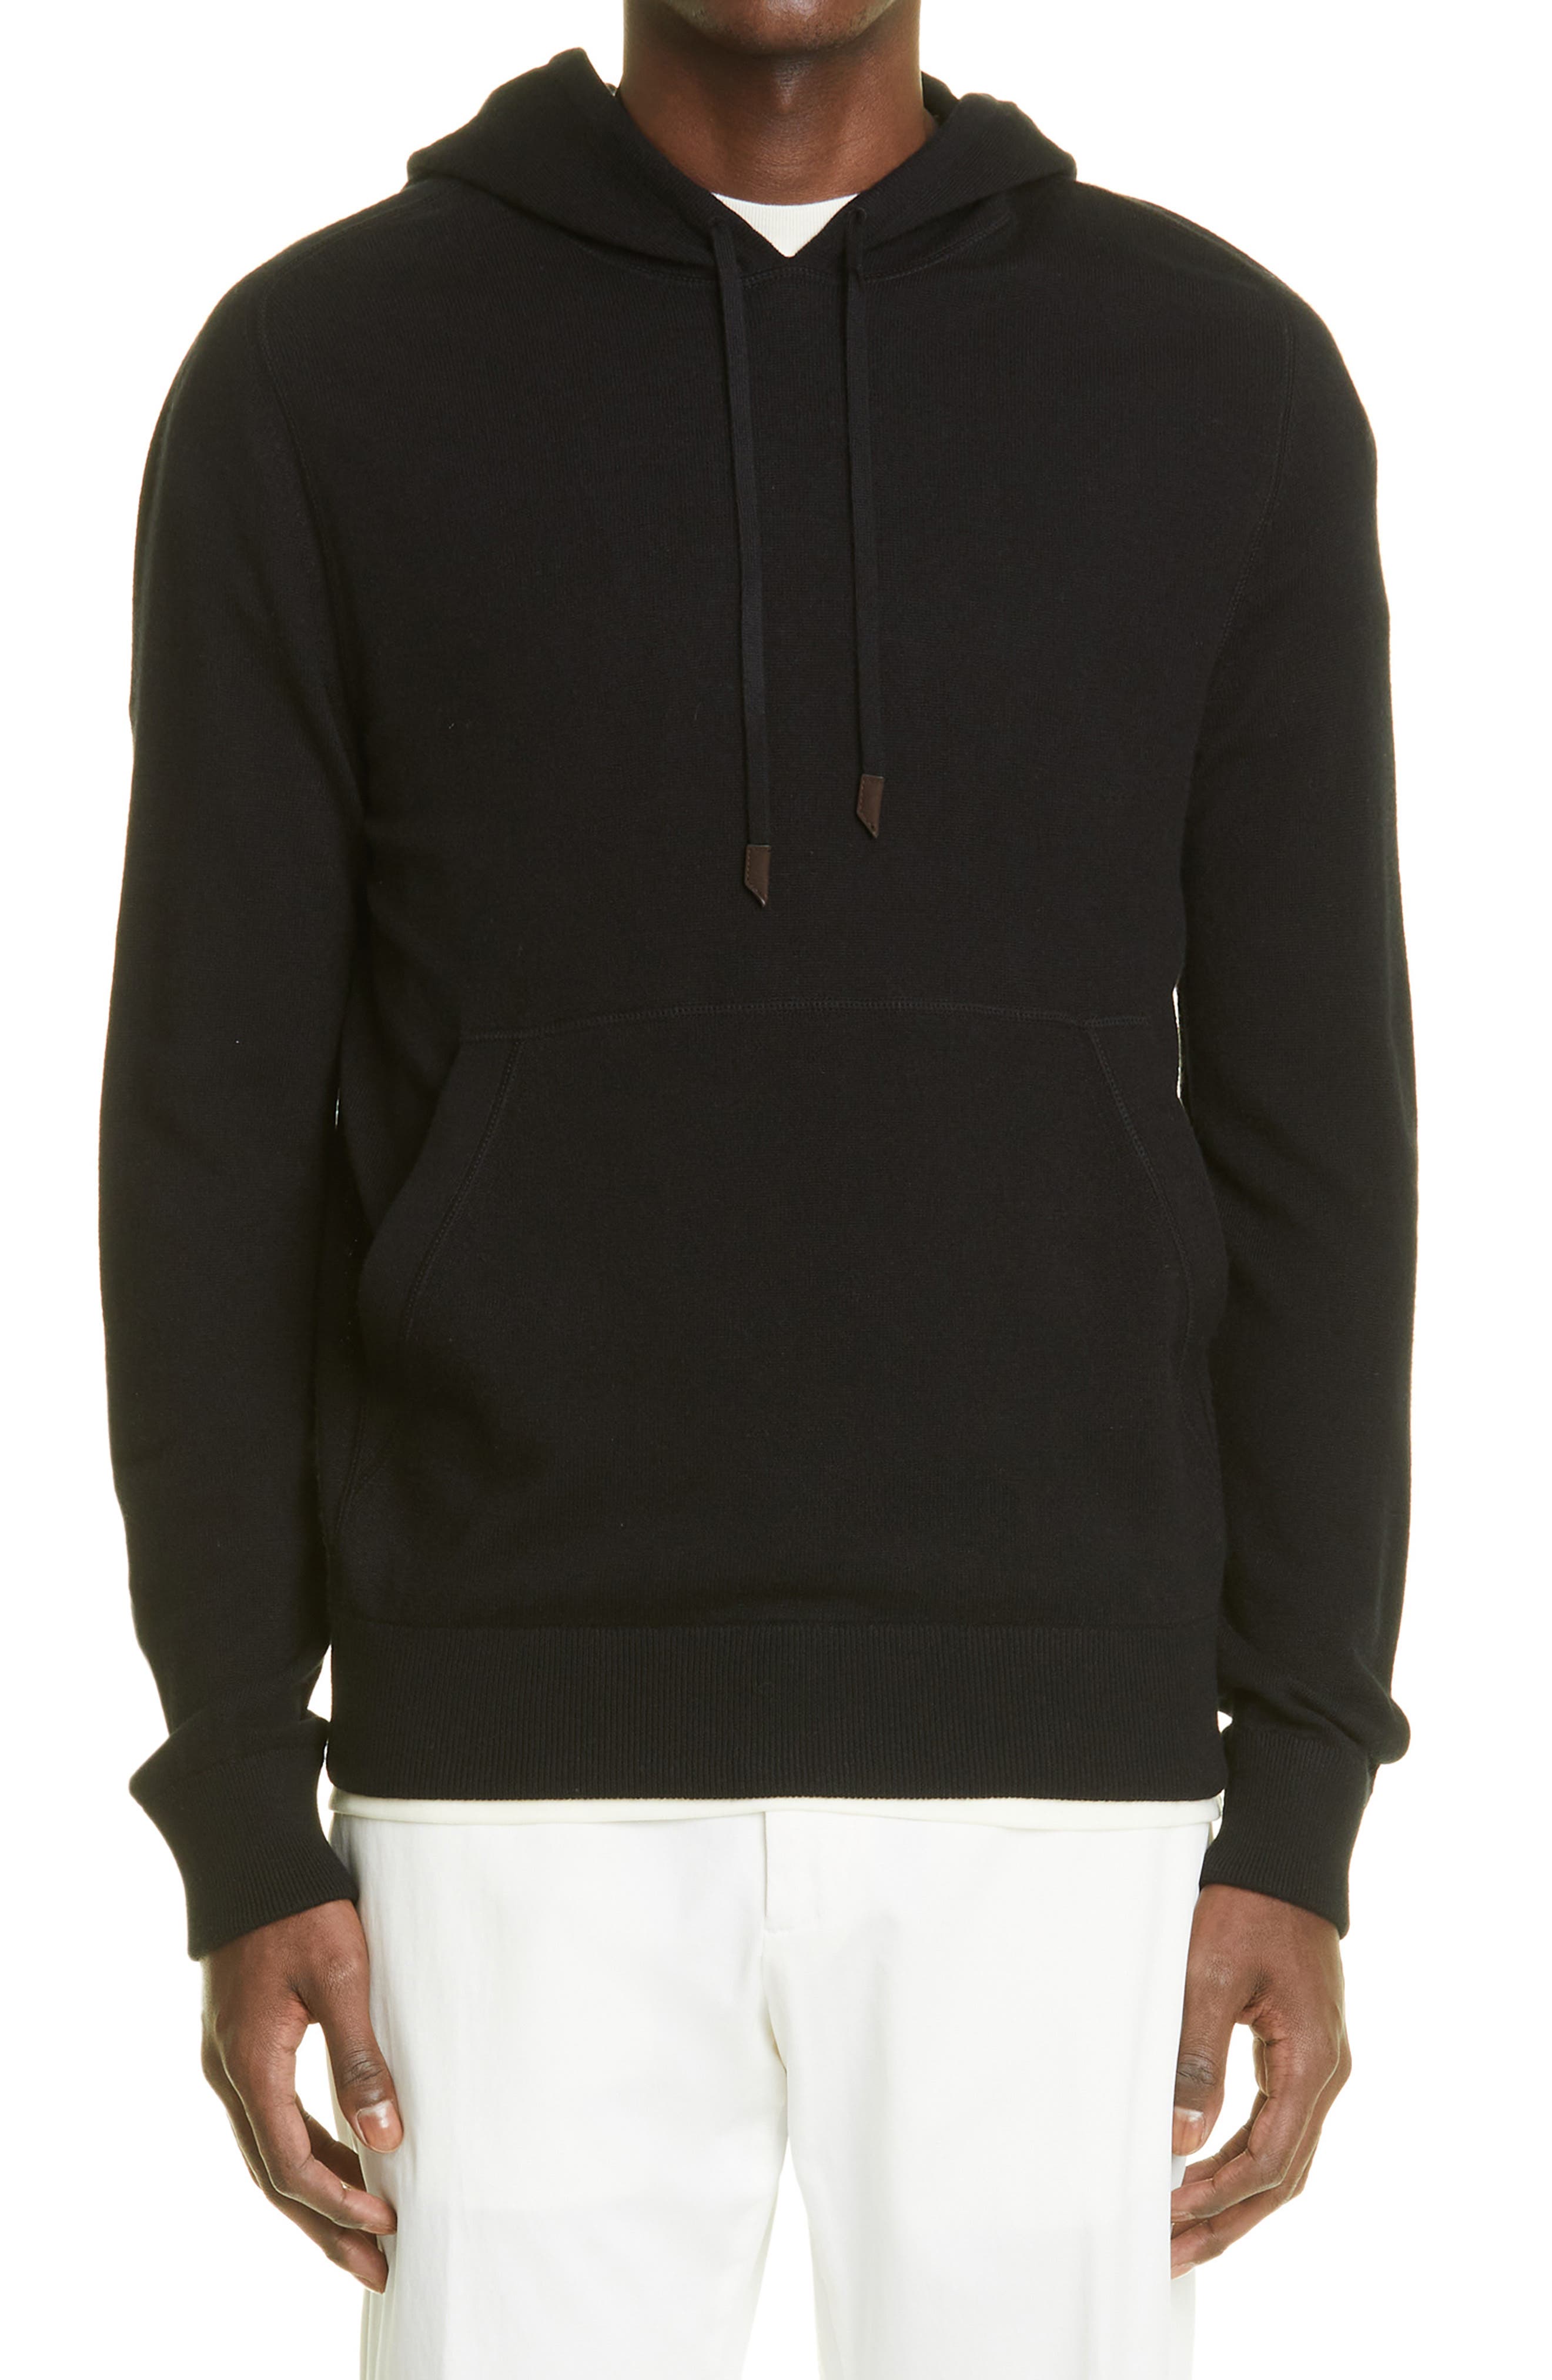 Cashmeren Men's Zip Up Hoodie 100% Pure Cashmere Long Sleeve Full Zip Down Pullover with Pockets 